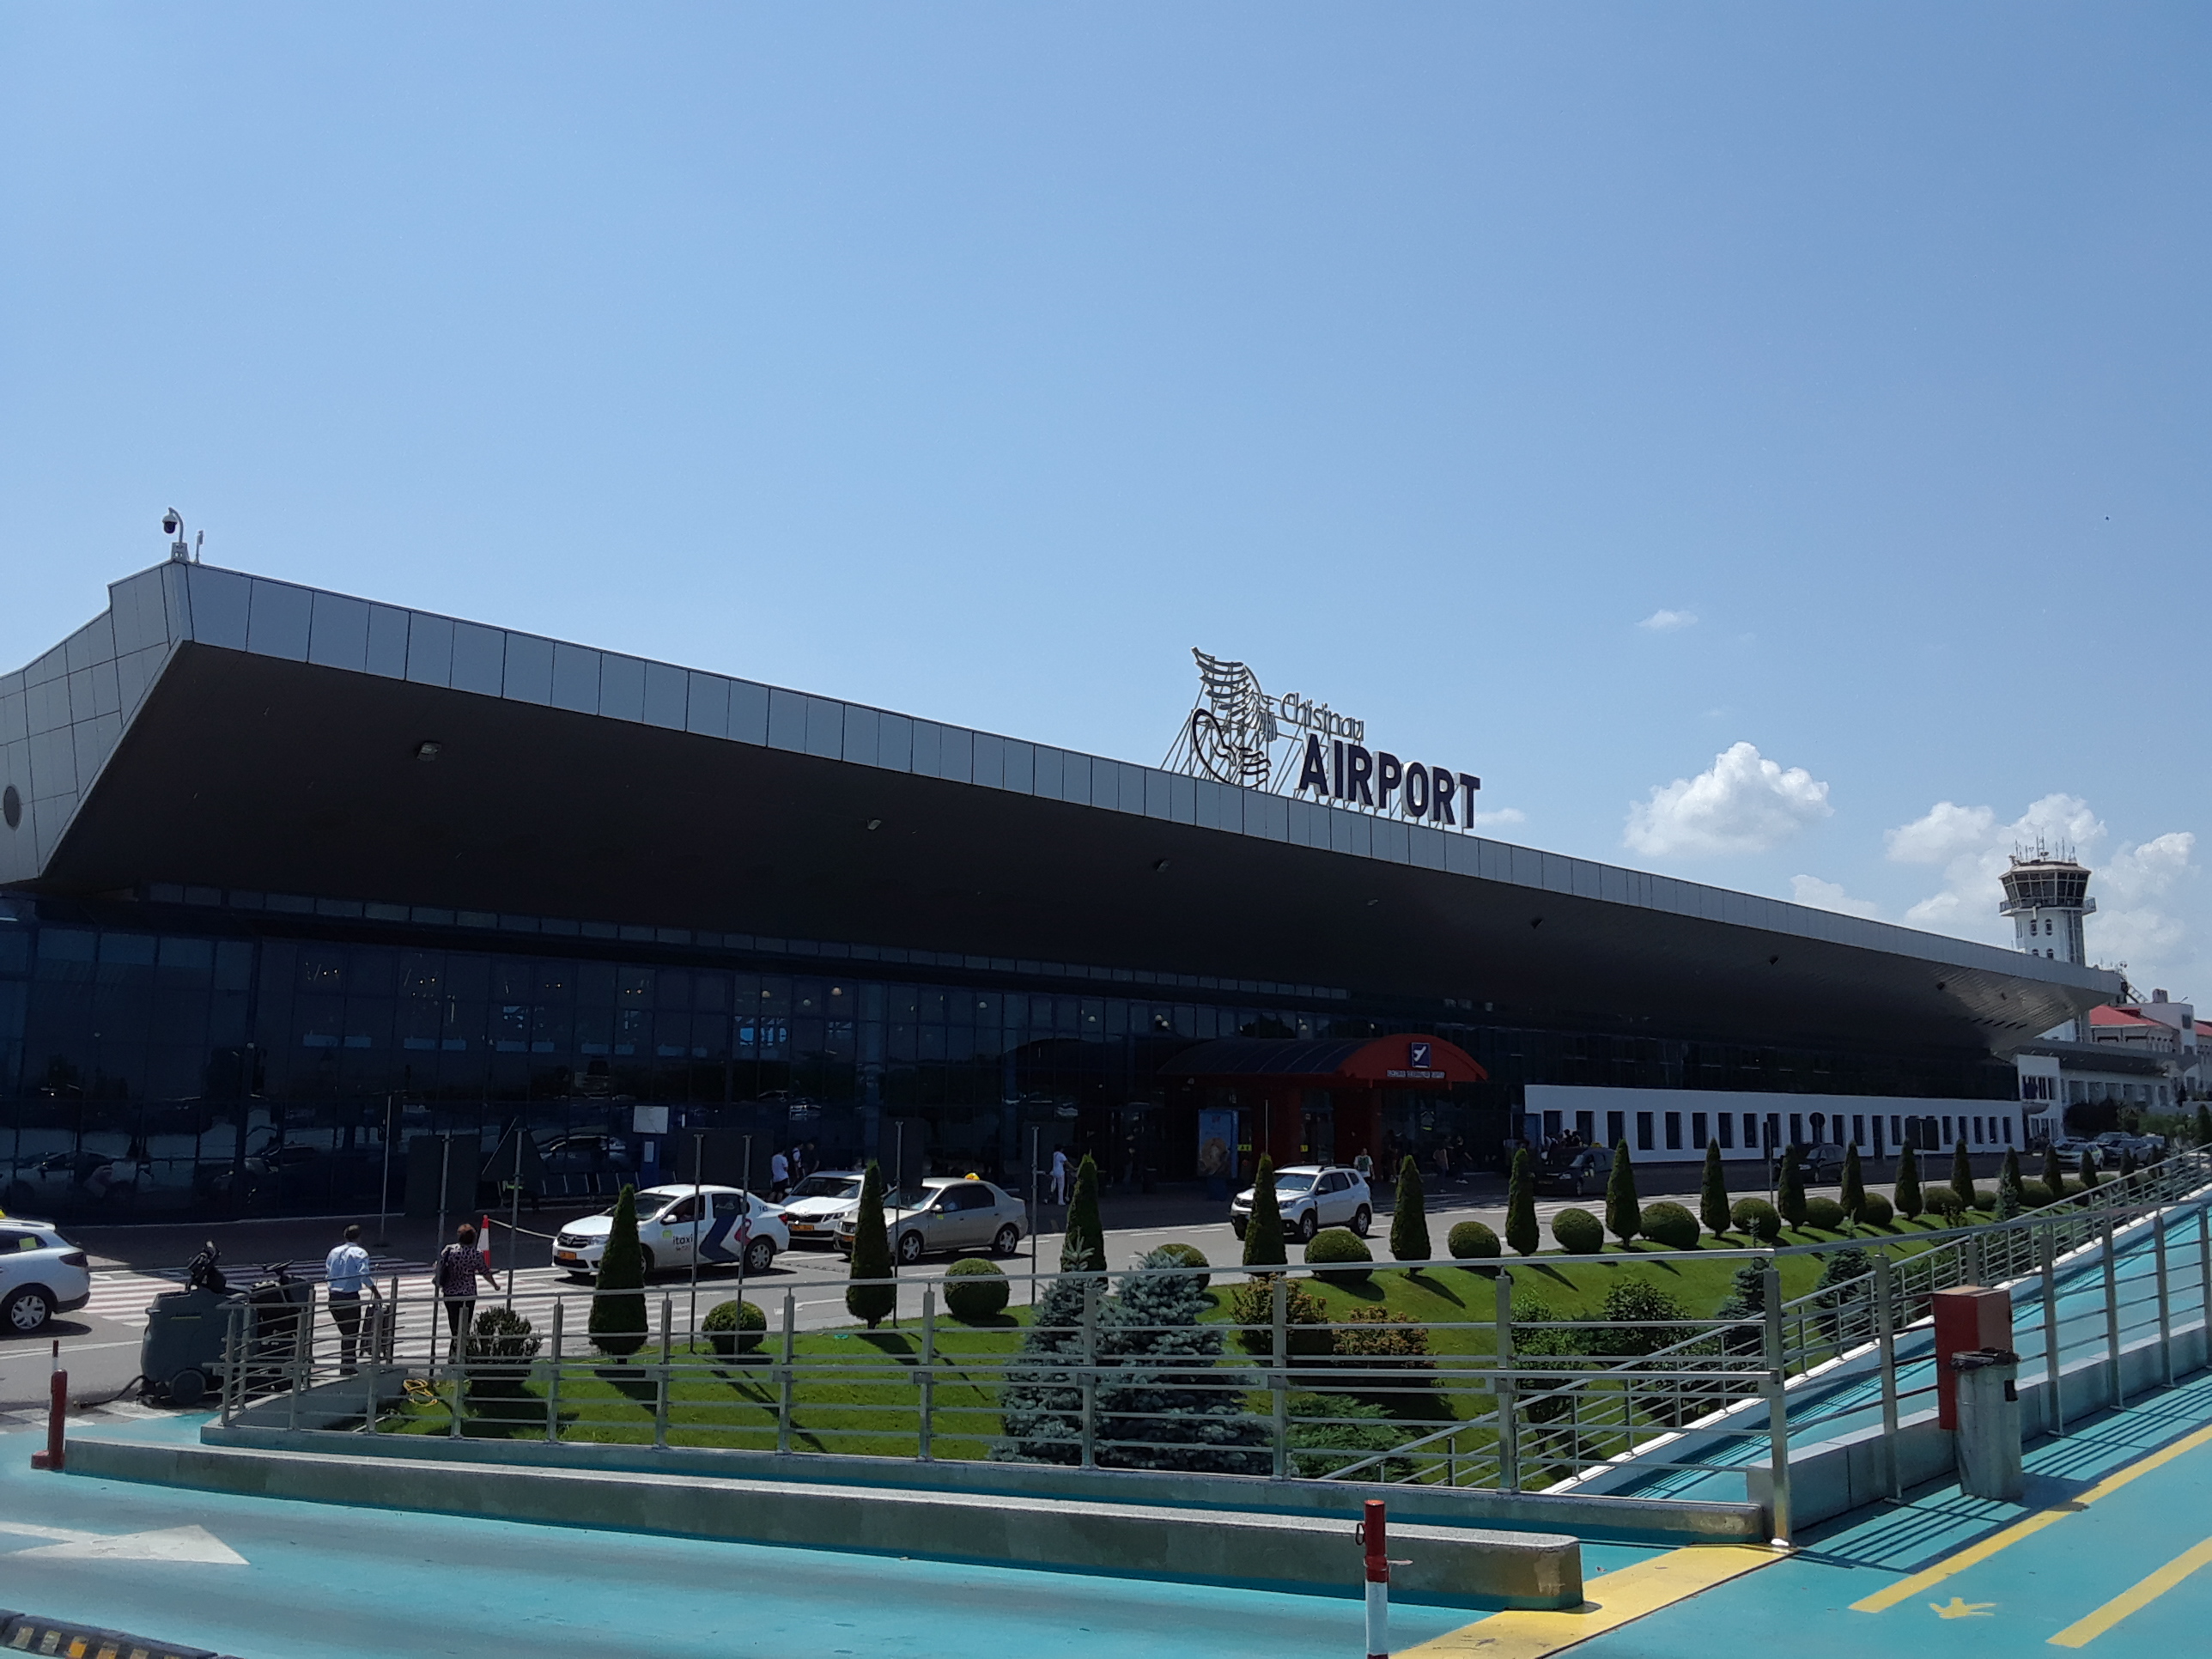 In Chisinau, they are changing access rules to the airport